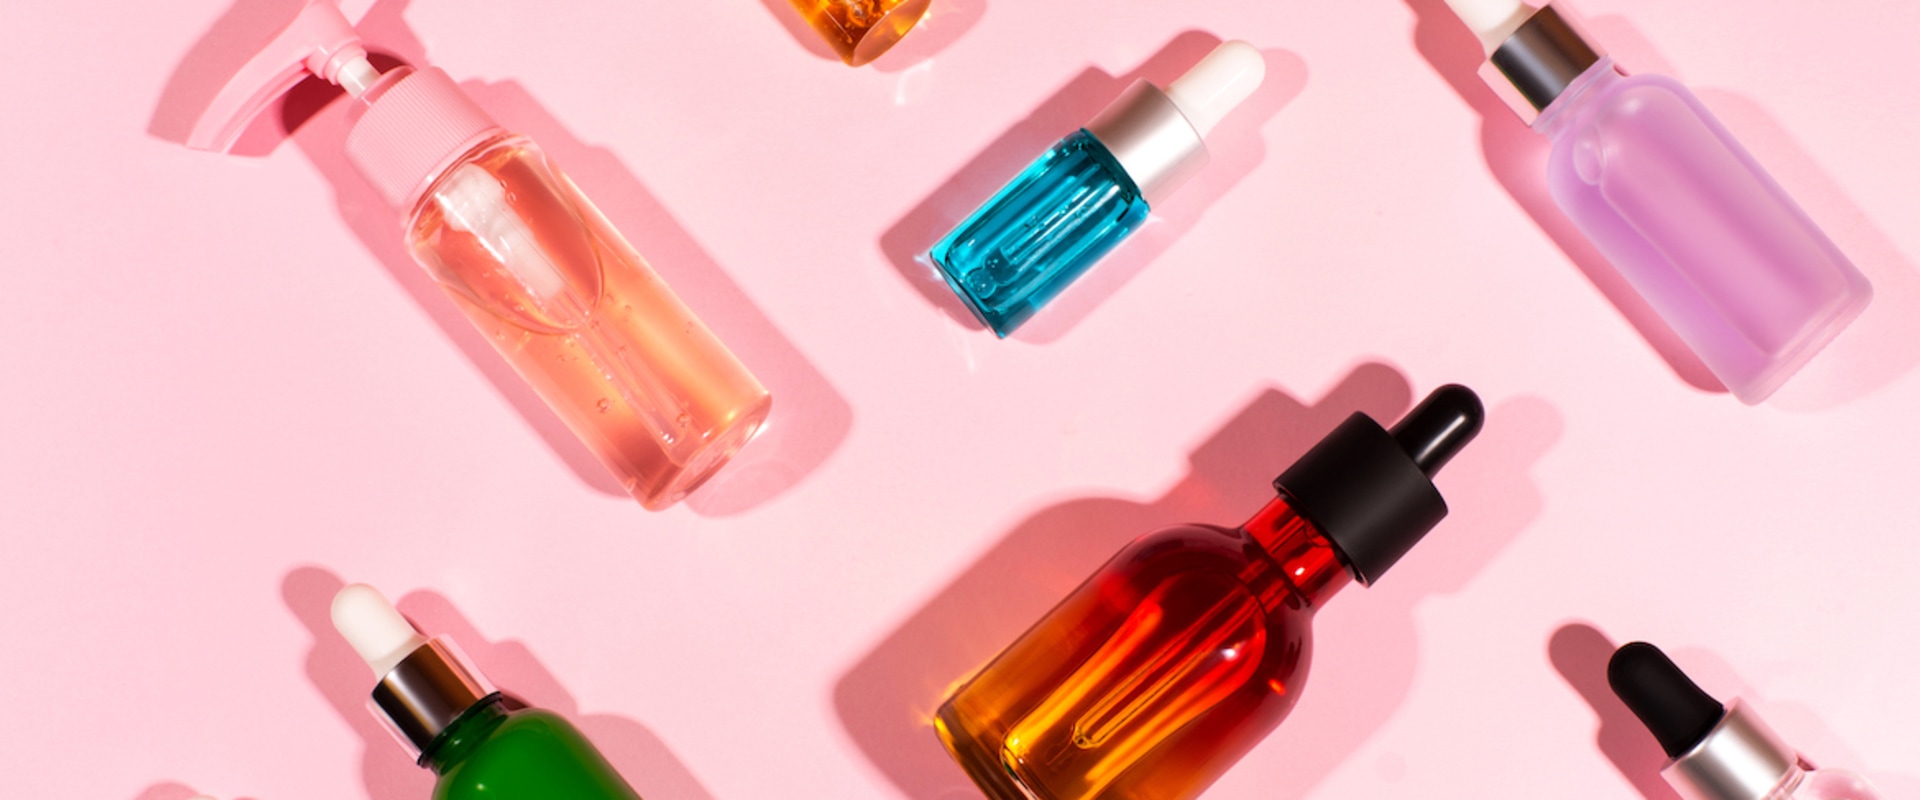 Travel-sized Fragrance Sets and Kits: Everything You Need to Know